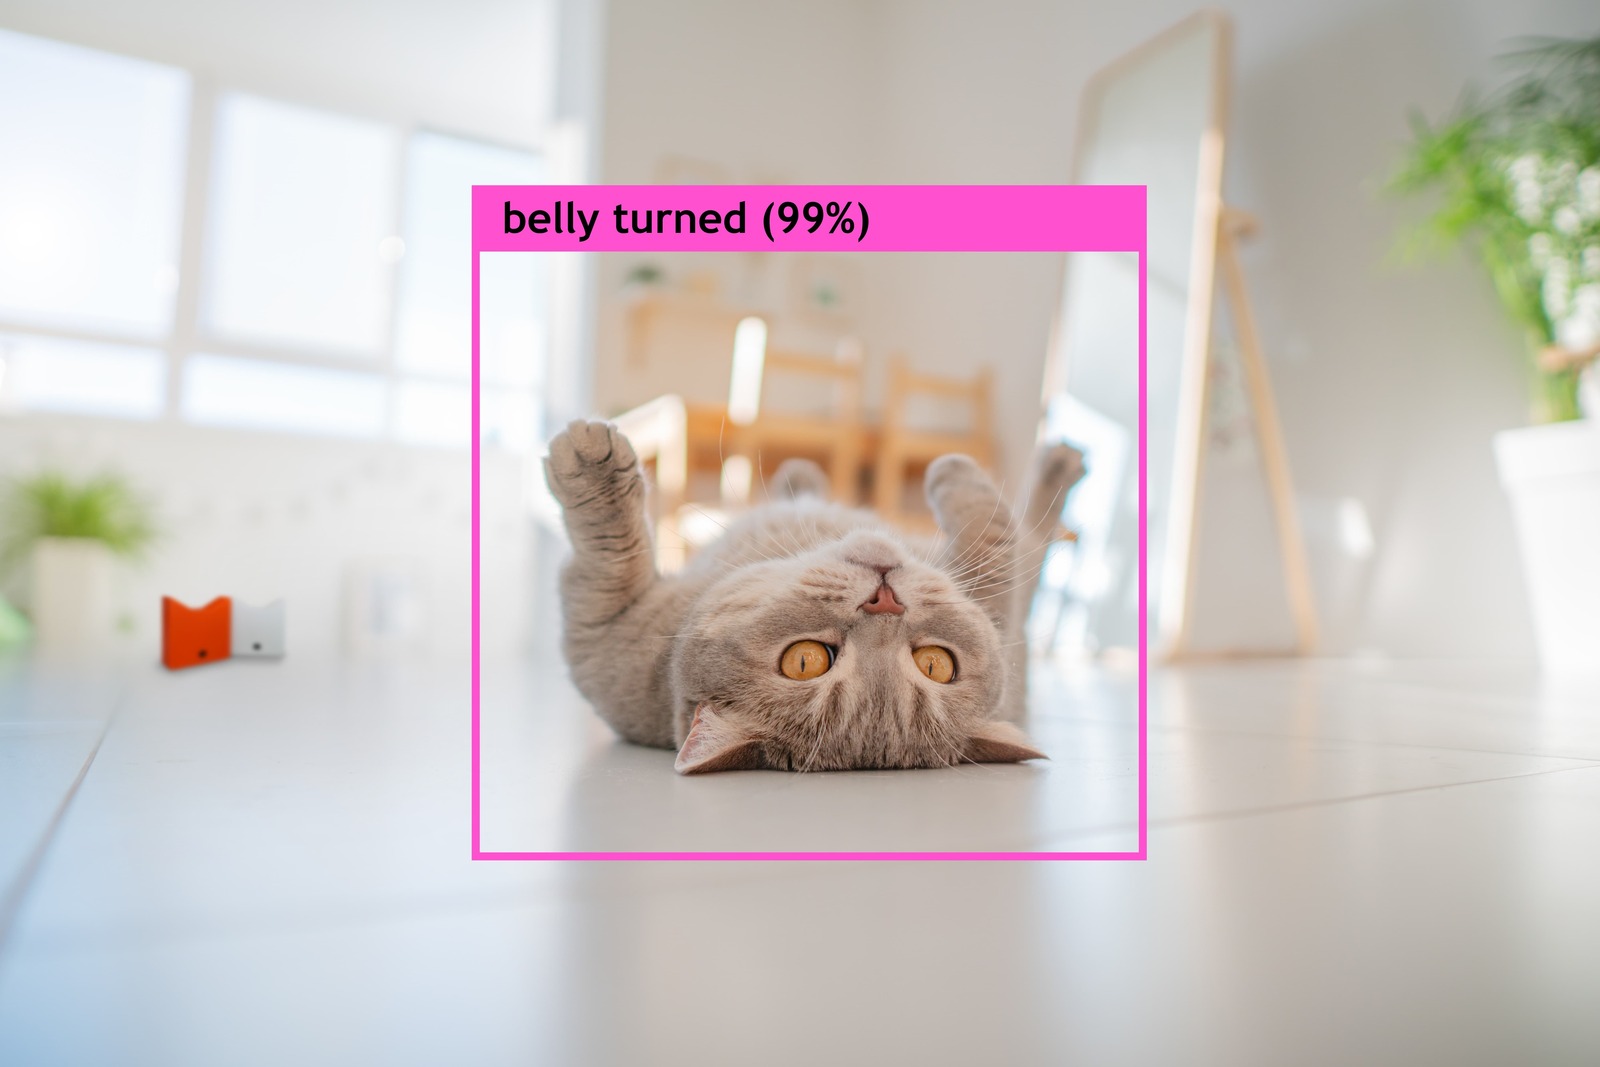 This pet camera utilizes Generative AI to train a DNN model to accurately capture cute events such as belly showing.